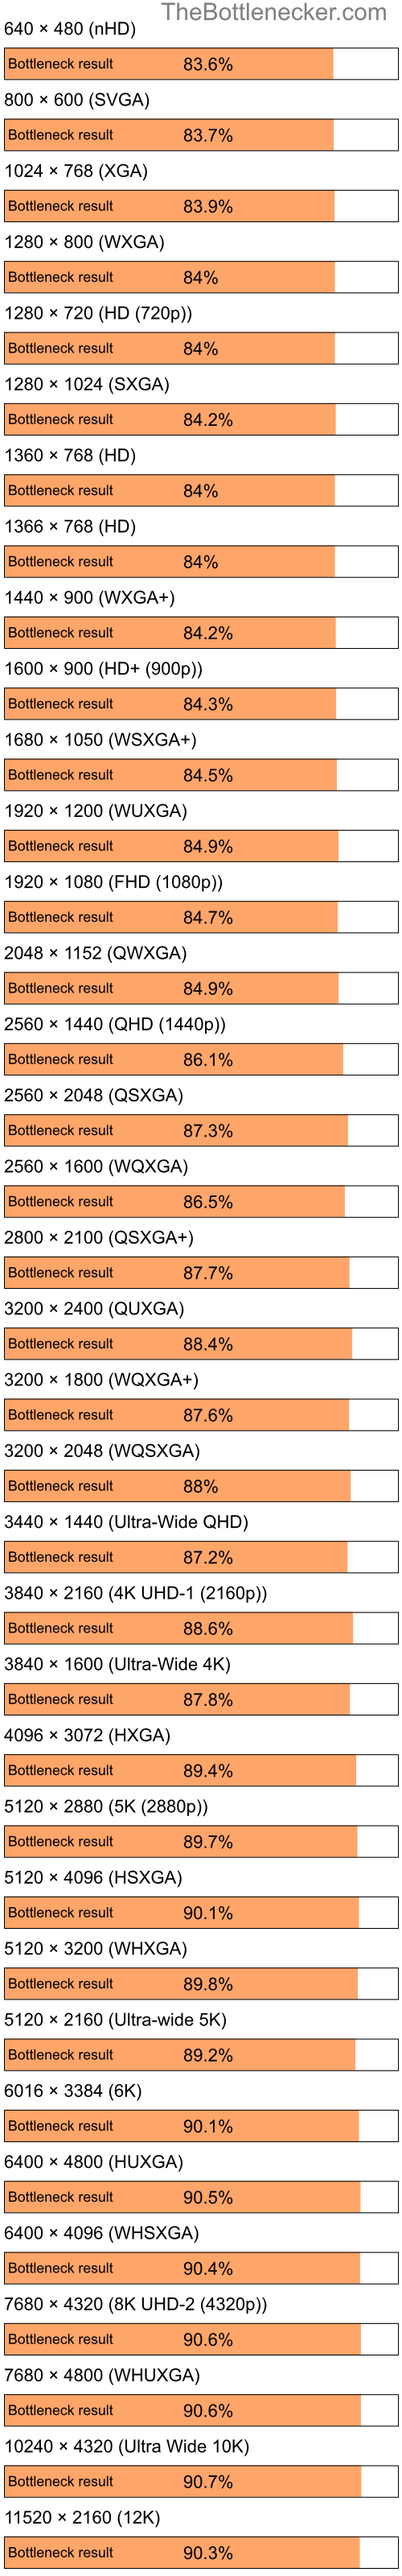 Bottleneck results by resolution for Intel Pentium 4 and NVIDIA GeForce 6100 nForce 405 in Graphic Card Intense Tasks